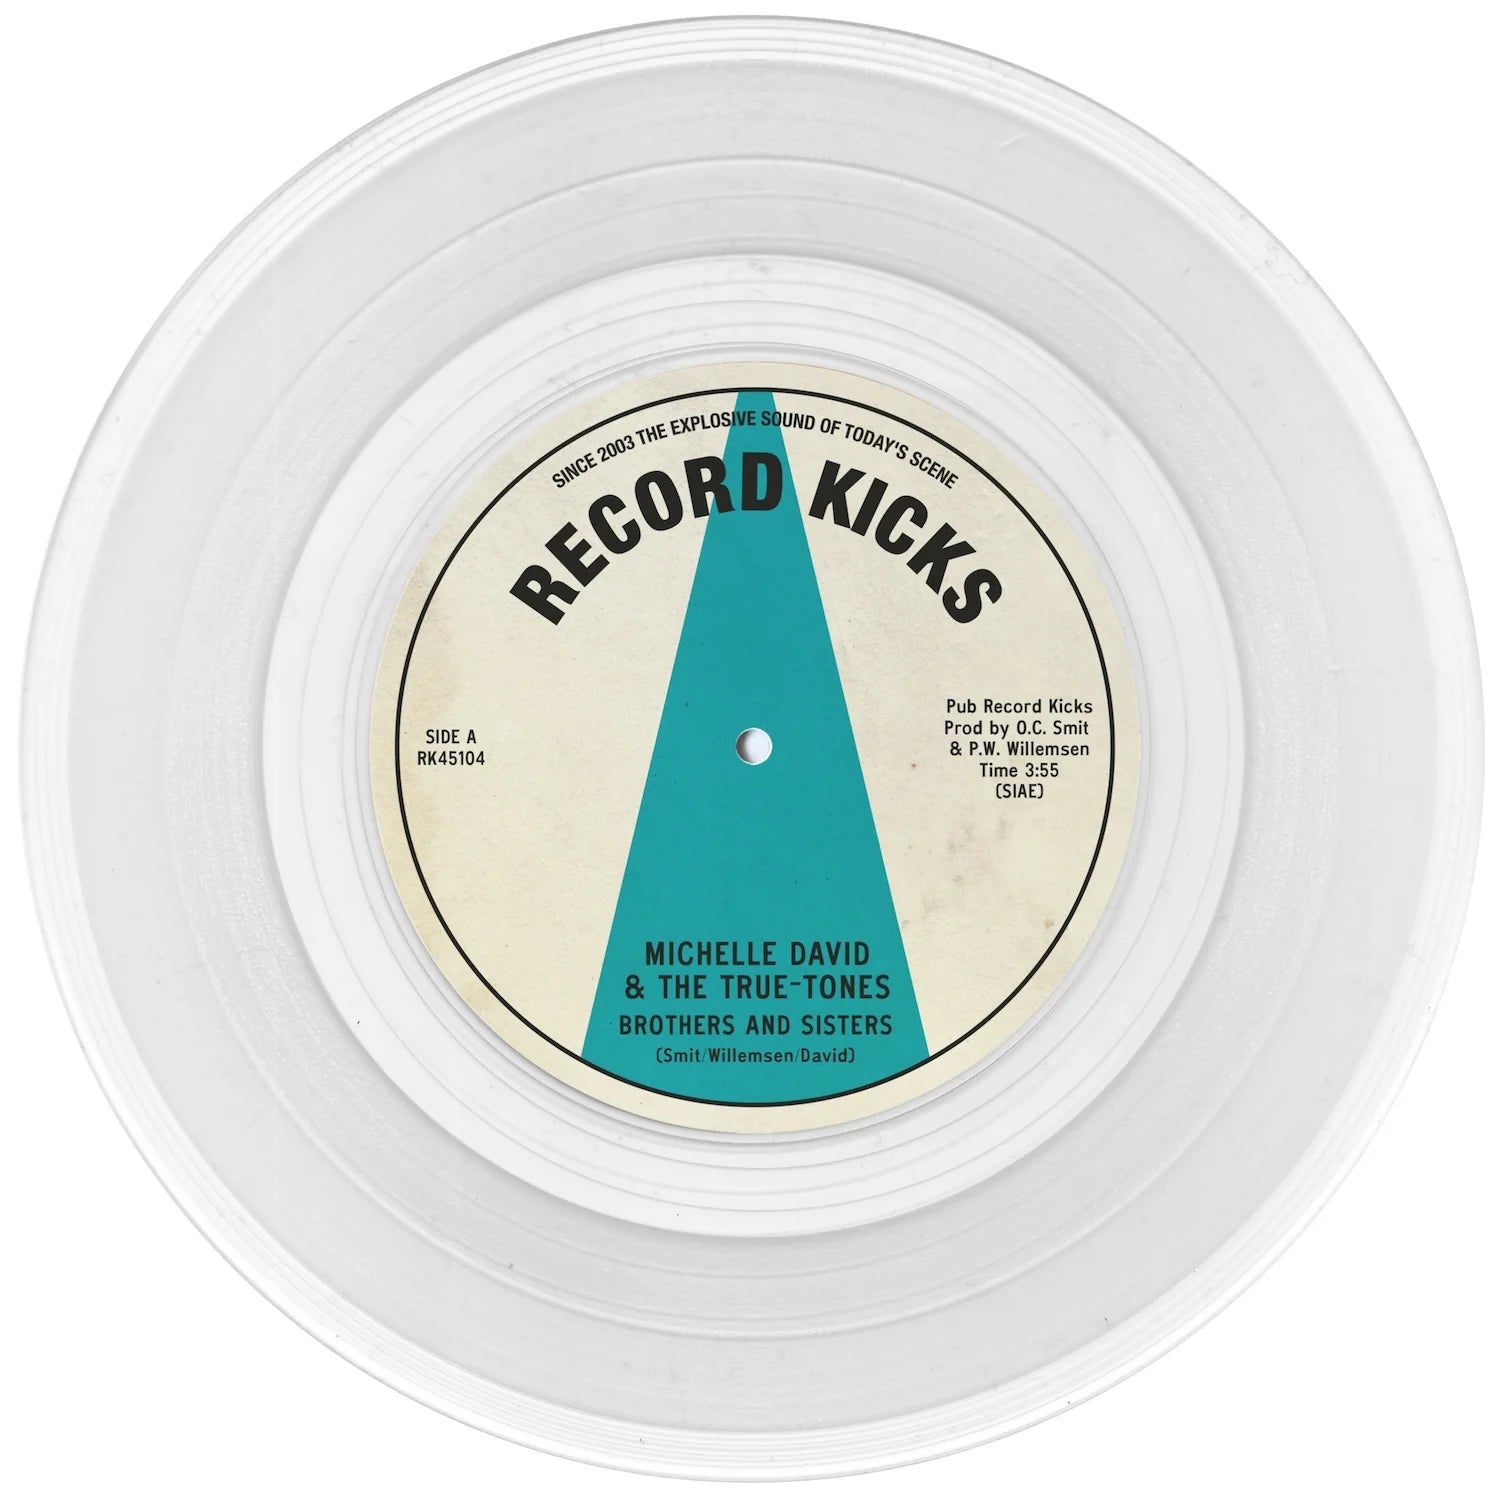 Michelle David & The Truth-Tones - Brothers And Sisters b/w That Is You